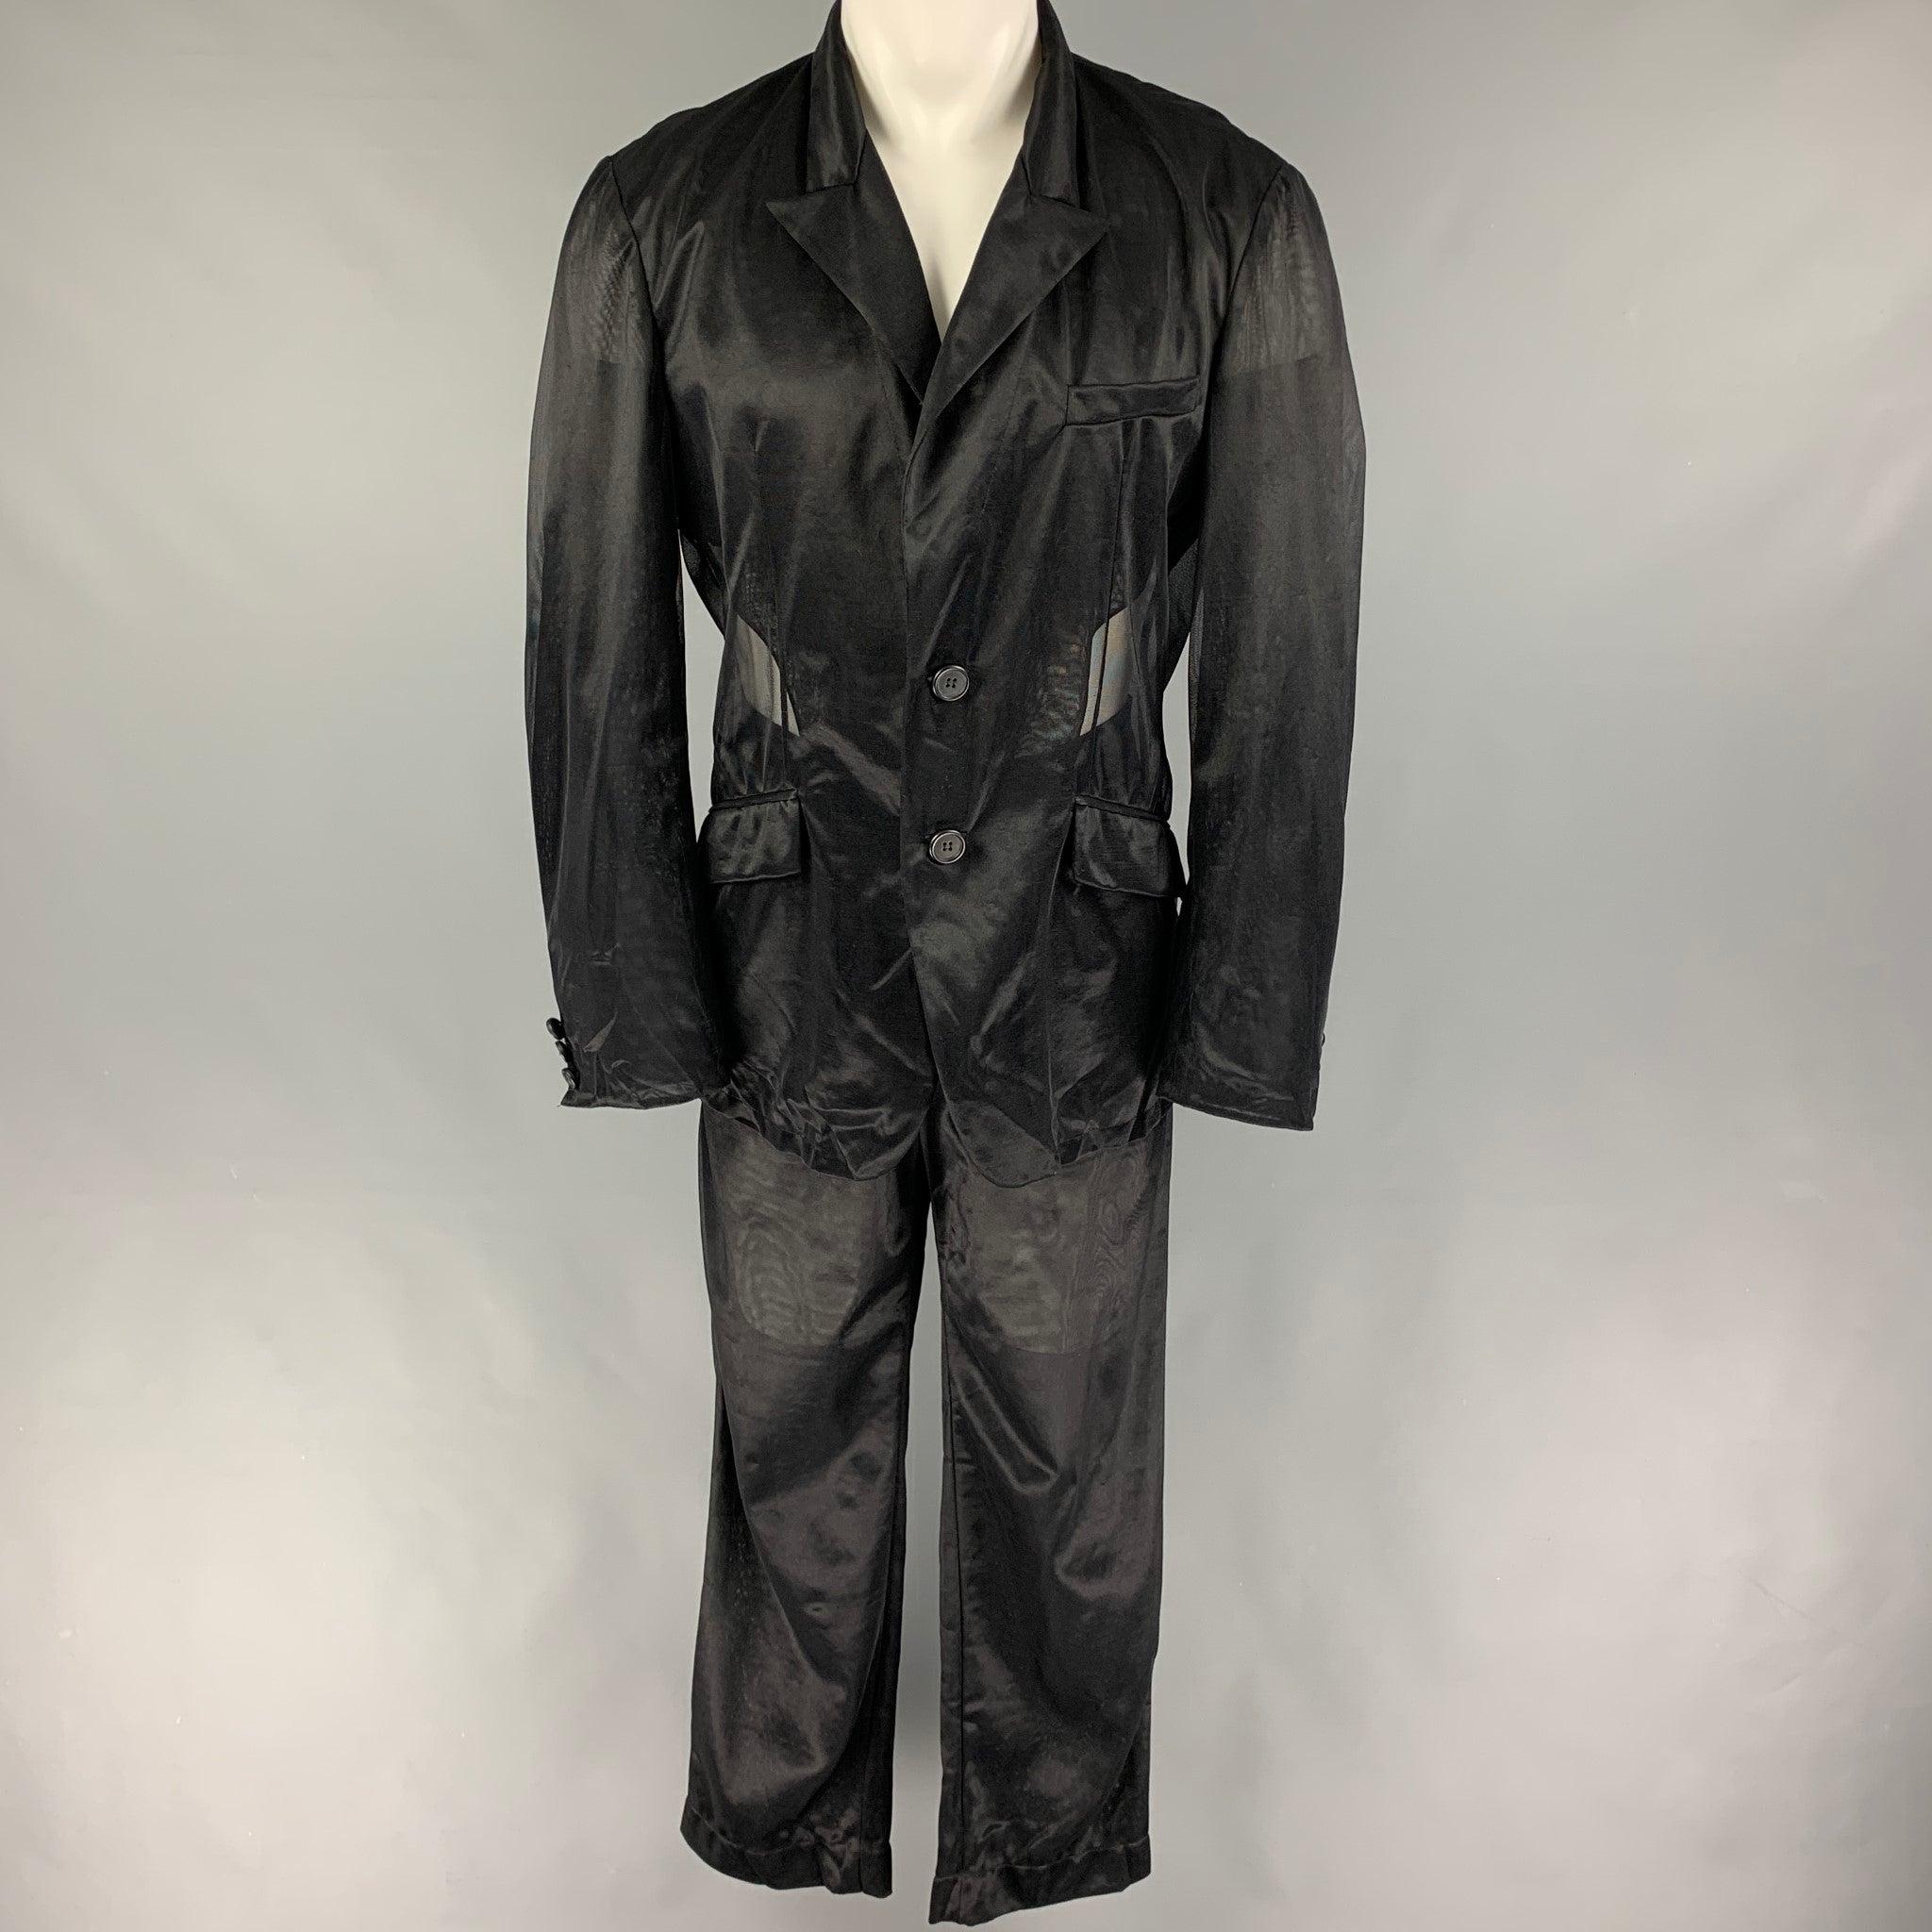 Vintage DOLCE & GABBANA
suit comes in black see-through polyamide and includes a single breasted, double button sport coat with a peak lapel and matching flat front trousers. Made in Italy. Good Pre-Owned Condition. 

Marked:   52 

Measurements: 
 